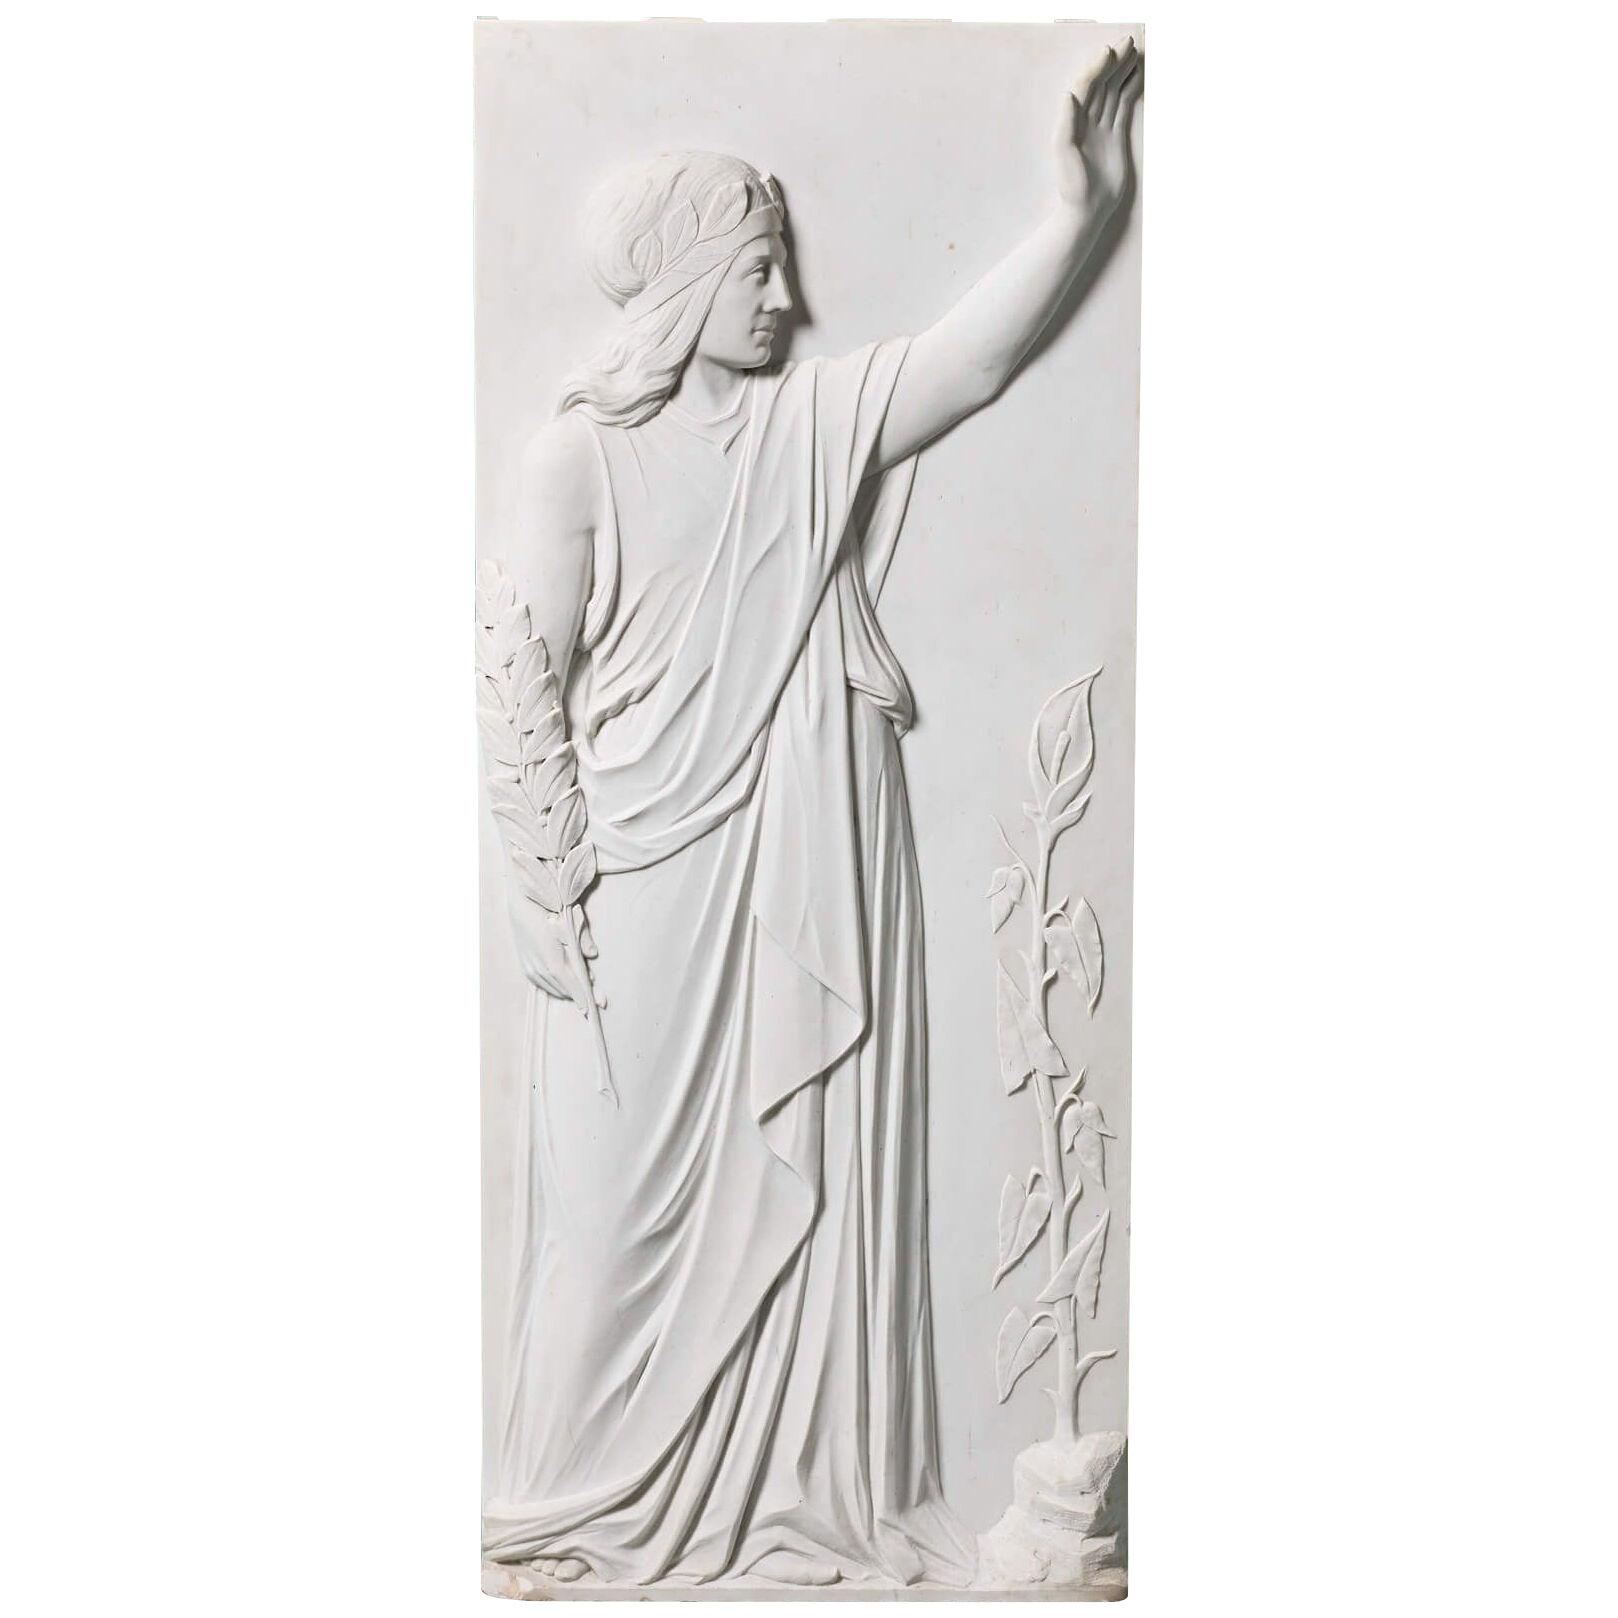 A Large Antique Statuary Marble Plaque of a Classical Figure